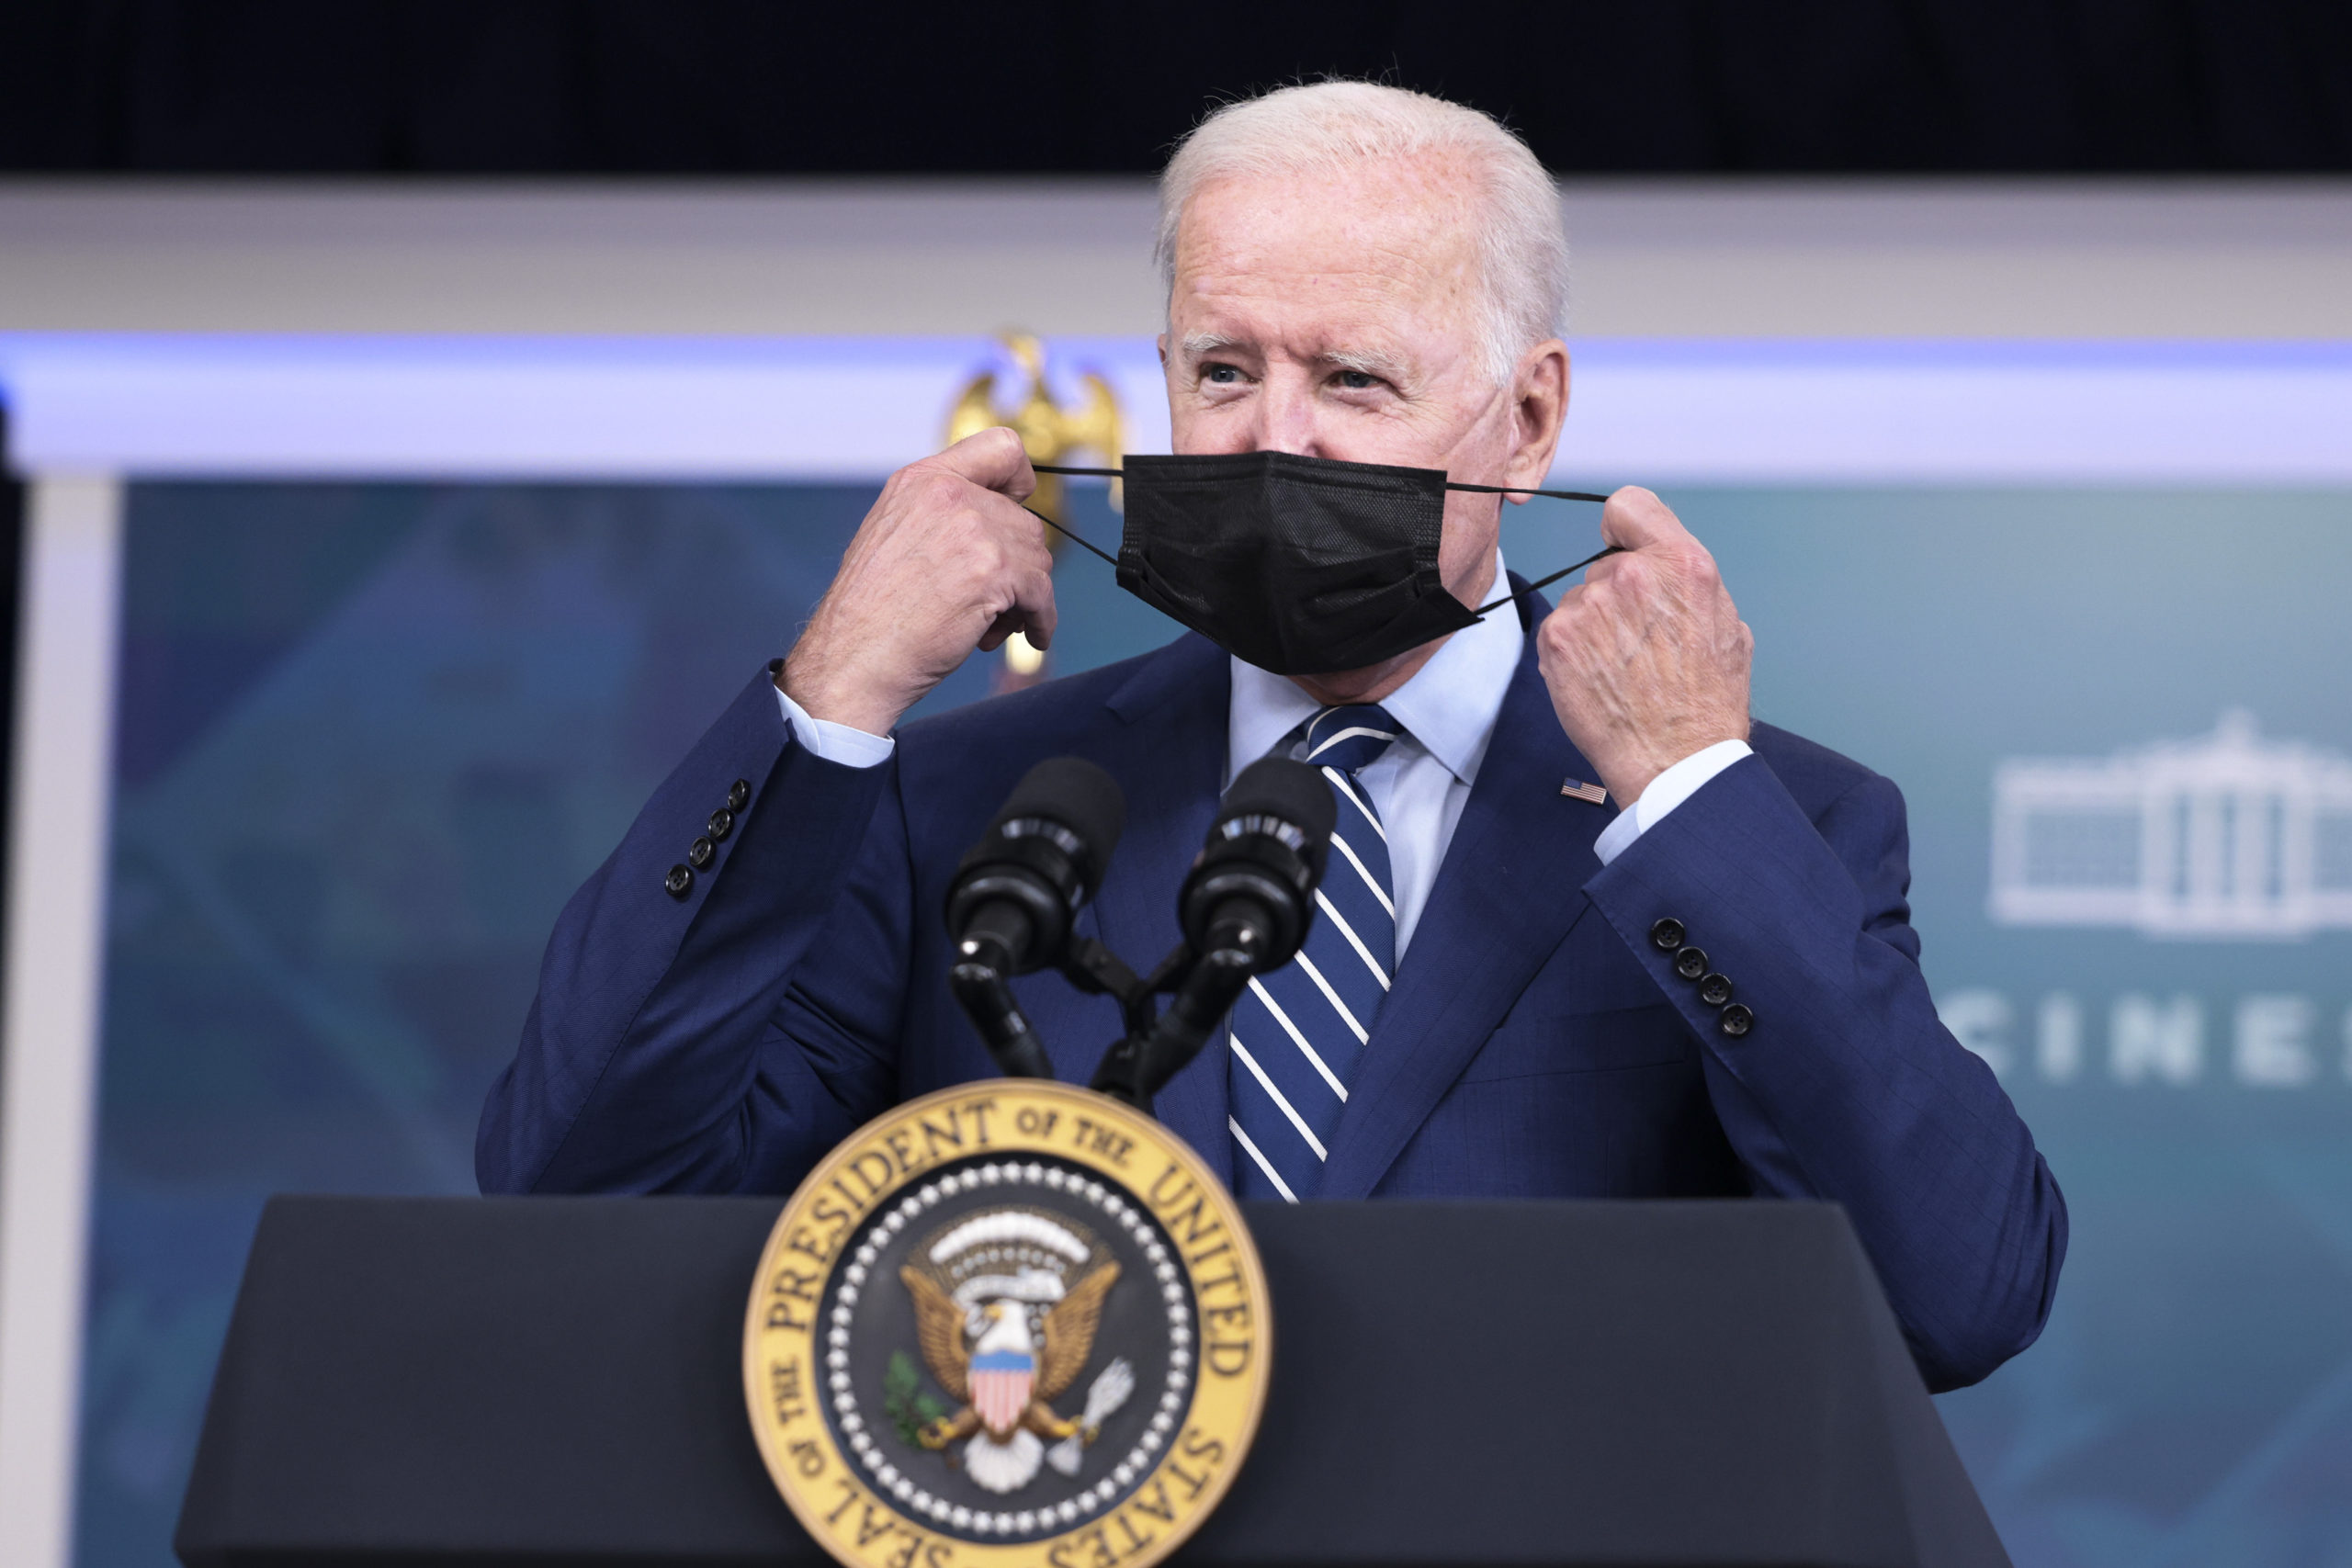 WASHINGTON, DC - SEPTEMBER 27: U.S. President Joe Biden removes his face mask before giving remarks ahead of receiving a third dose of the Pfizer/BioNTech Covid-19 vaccine in the South Court Auditorium in the White House September 27, 2021 in Washington, DC. Last week President Biden announced that Americans 65 and older and frontline workers who received the Pfizer-BioNTech COVID-19 vaccine over six months ago would be eligible for booster shots. (Photo by Anna Moneymaker/Getty Images)